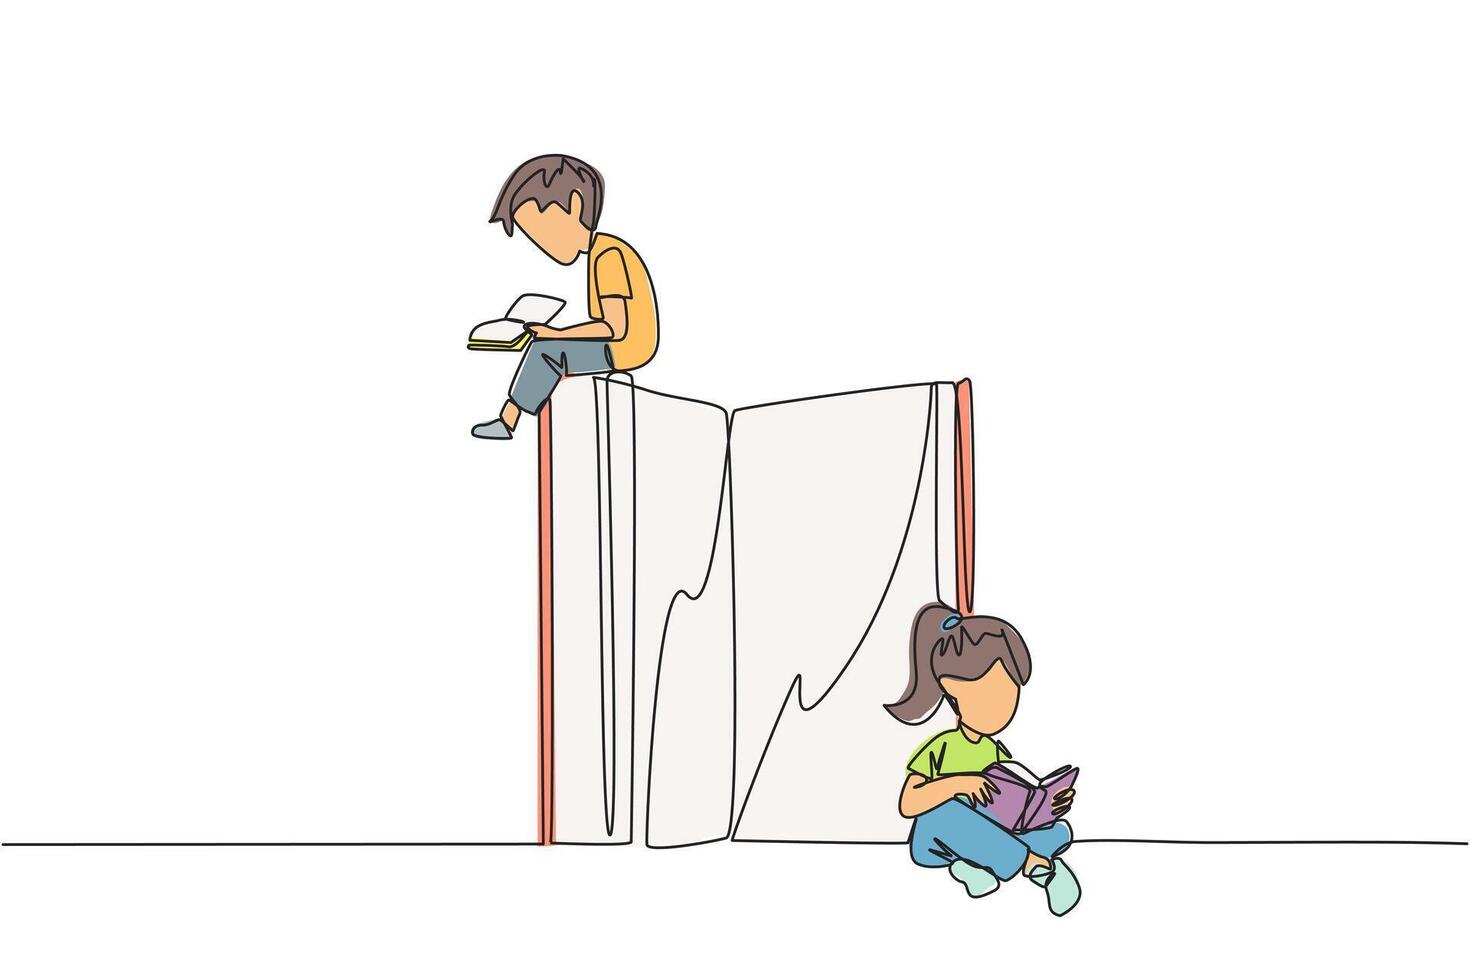 Continuous one line drawing children sit reading books while the big book is open. Serious and focus learning increases insight. Book festival concept. Single line draw design illustration vector